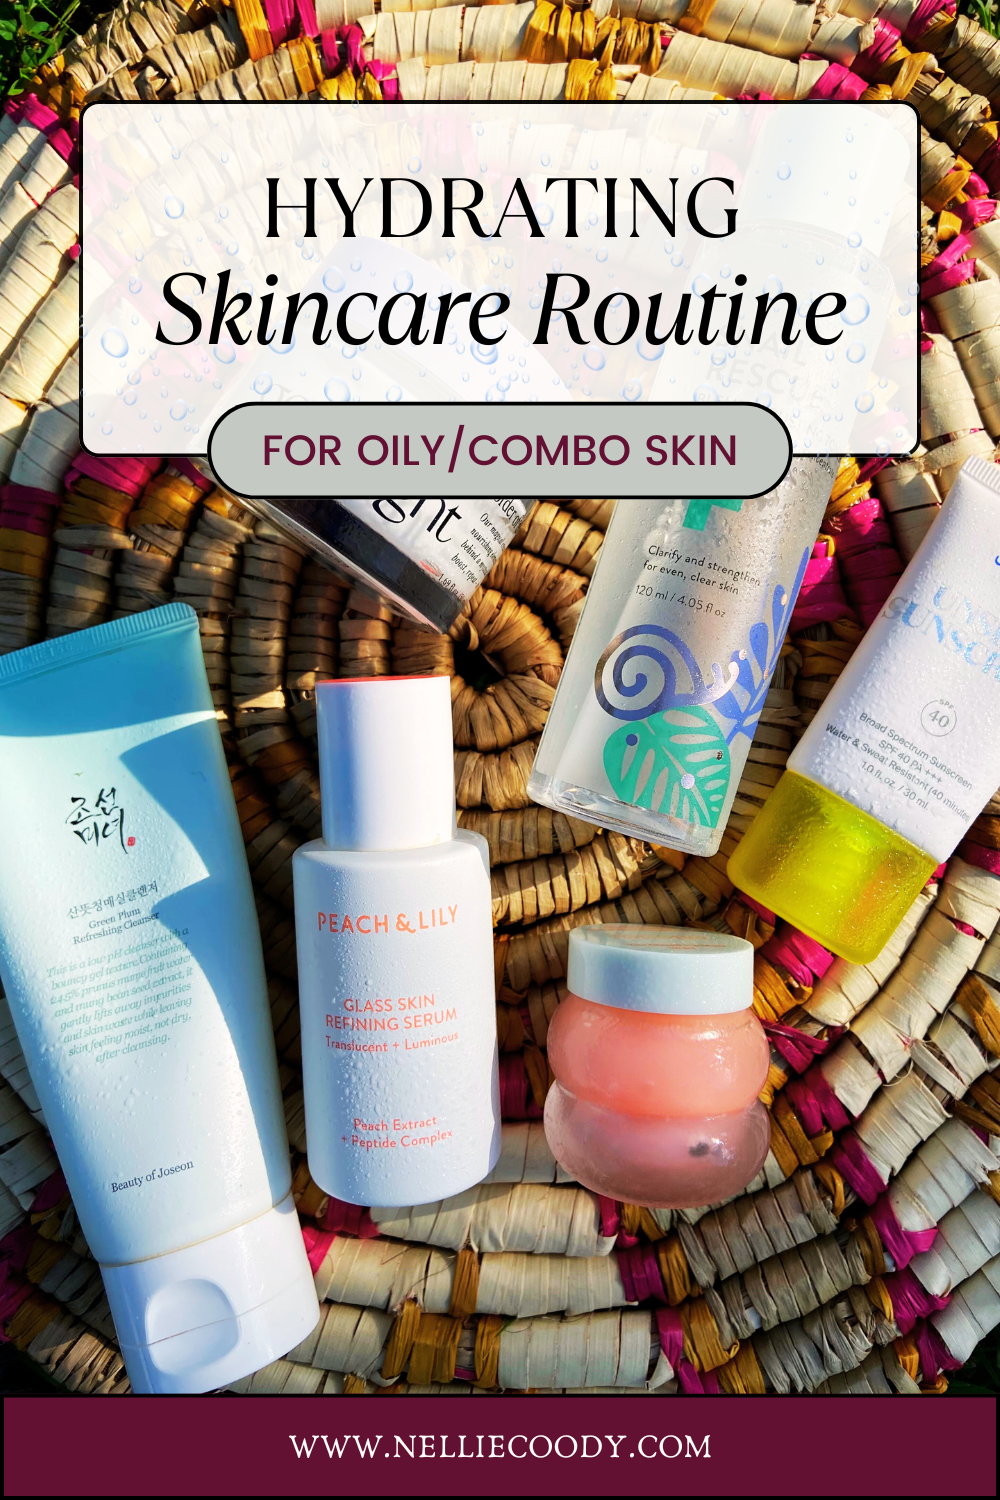 Hydrating Skincare Routine for Oily/Combo Skin